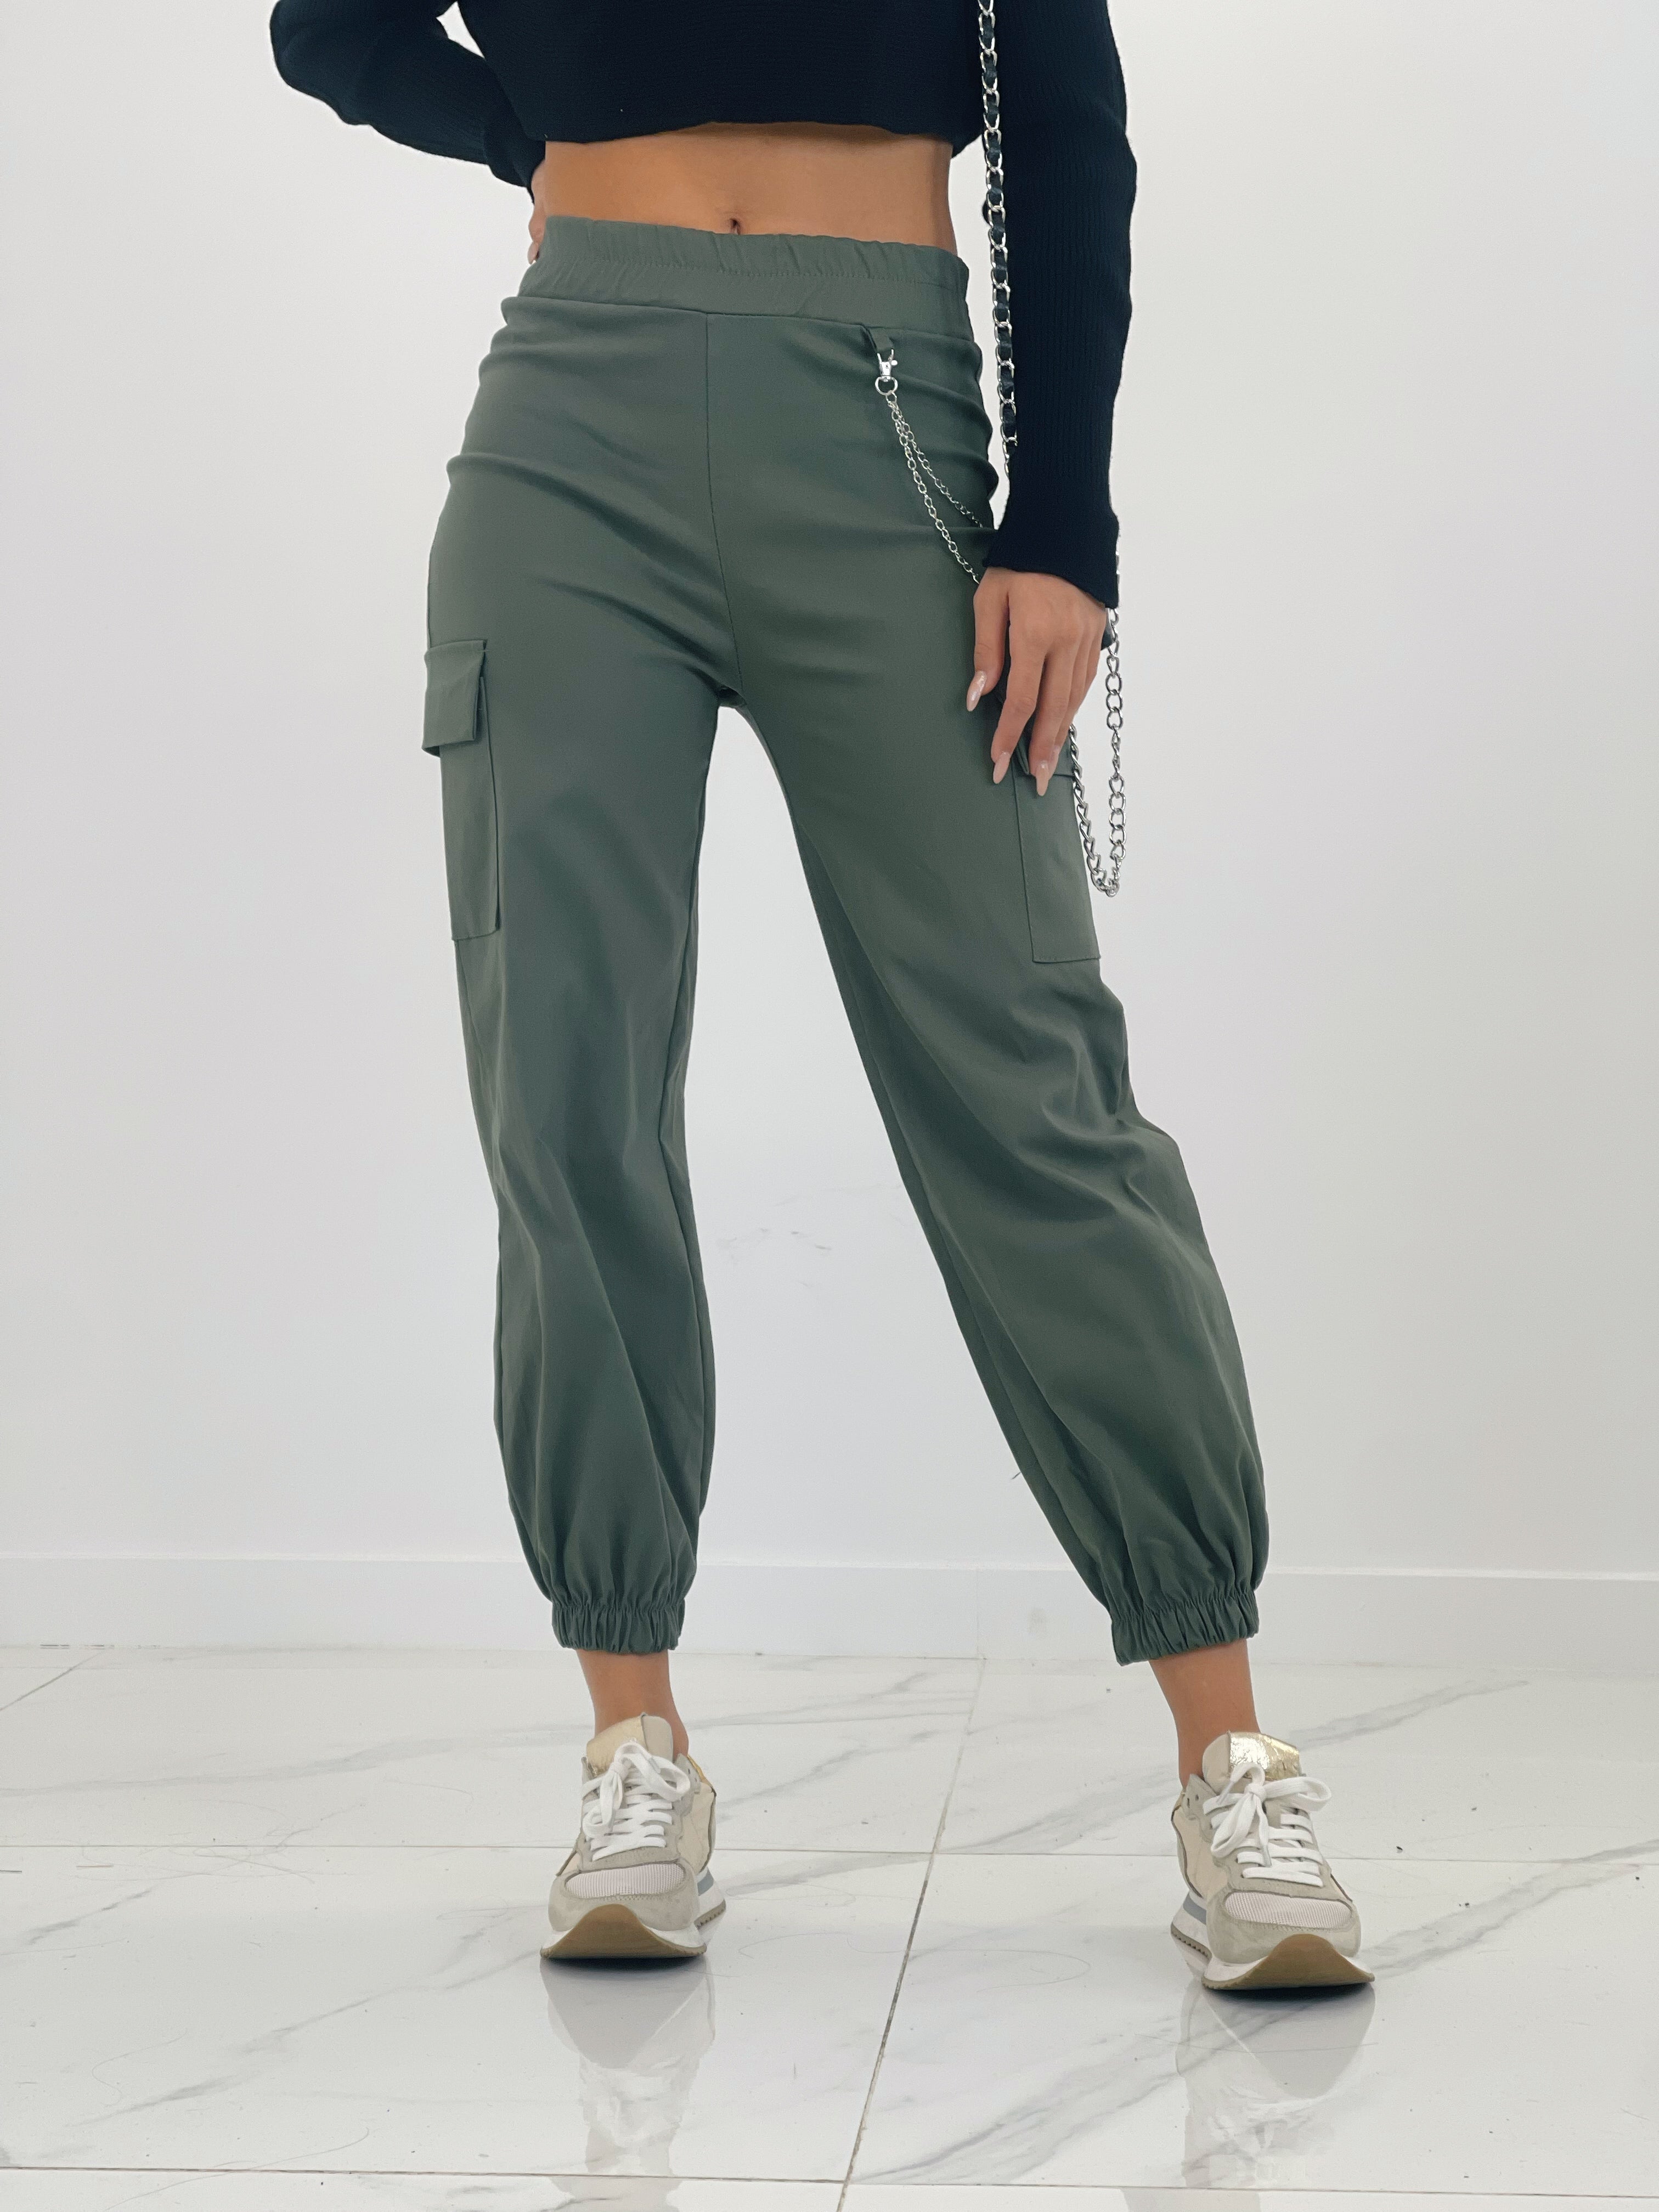 High Waist Fleece Cargo Pants With Chain For Women Harajuku Sportswear And  Elastics Cargo Trousers Primark From Here_well, $35.54 | DHgate.Com